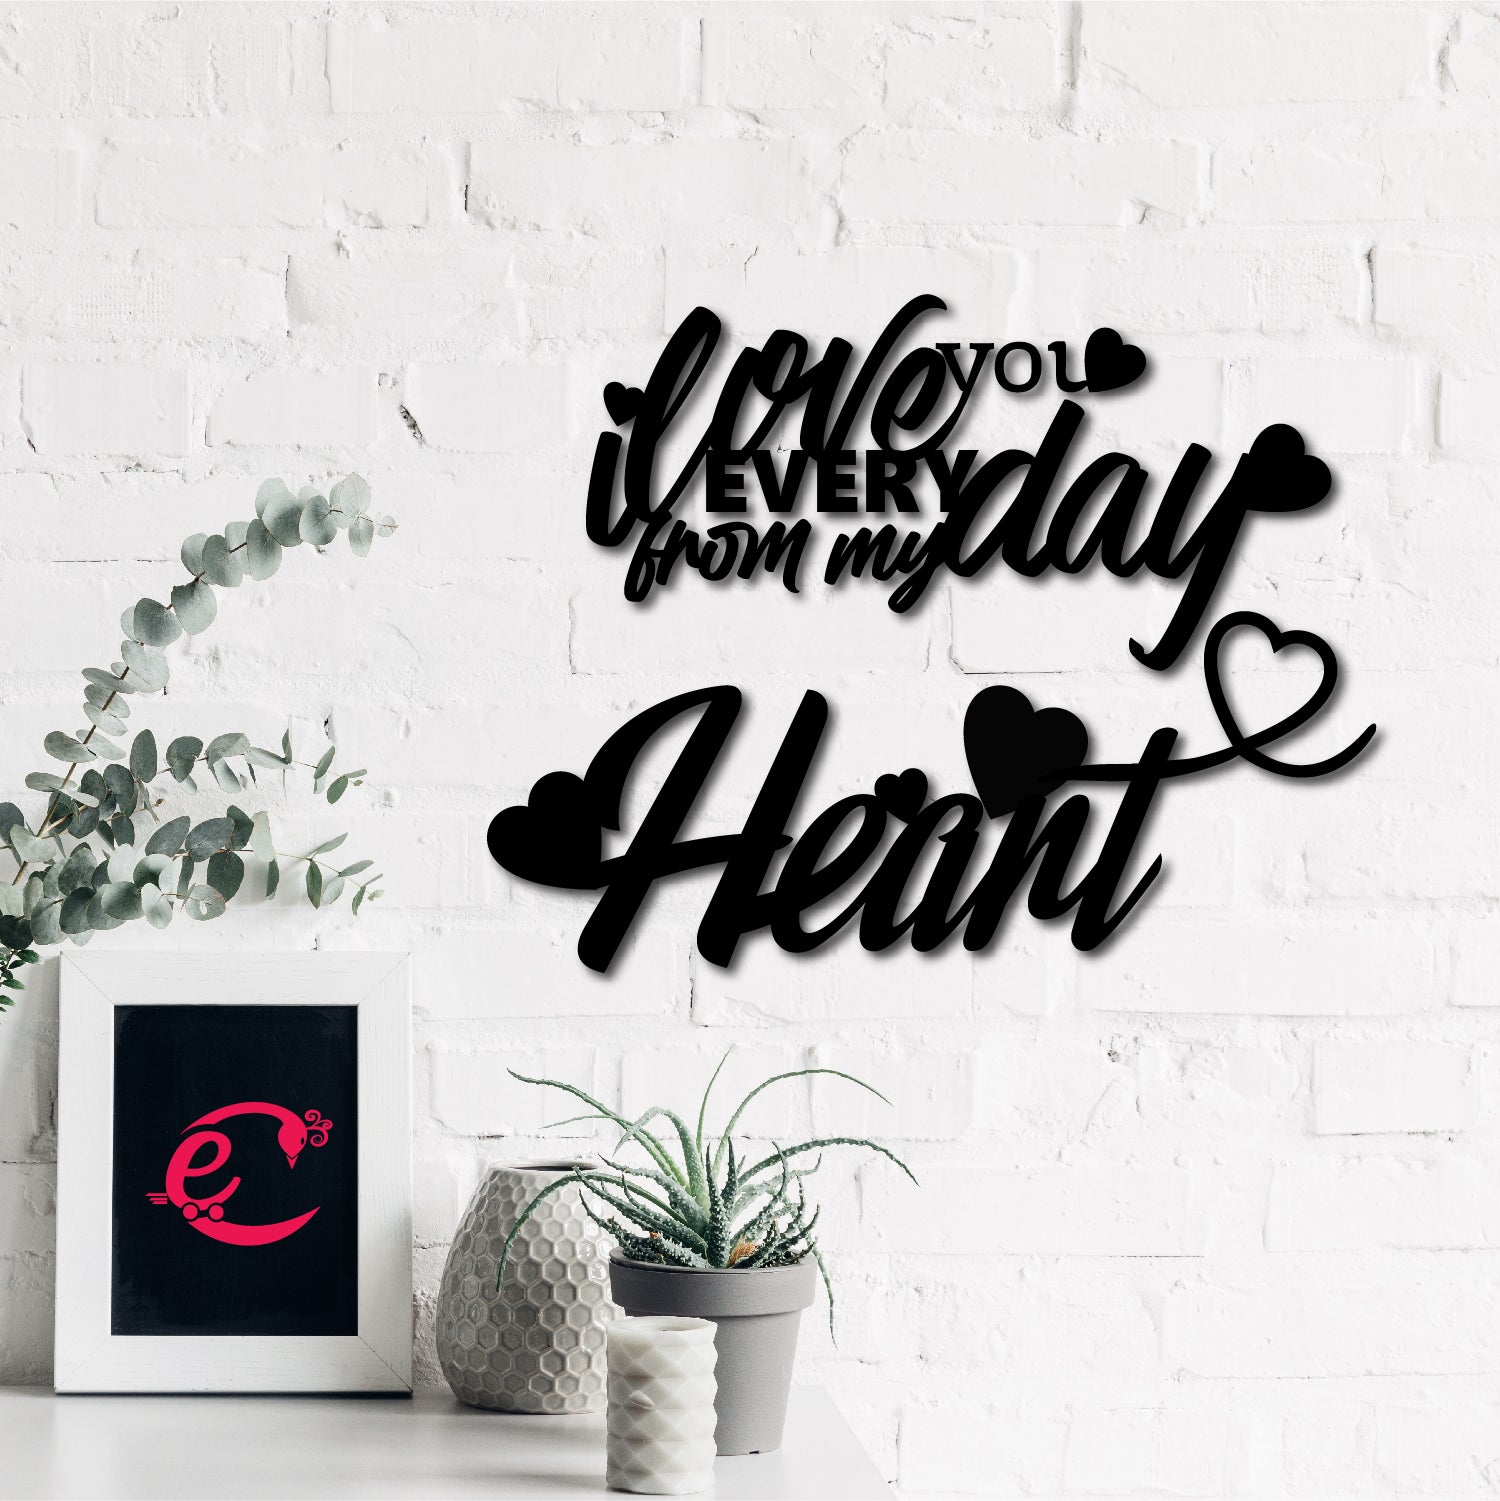 "Love You Everyday From My Heart" Black Engineered Wood Wall Art Cutout, Ready to Hang Home Decor